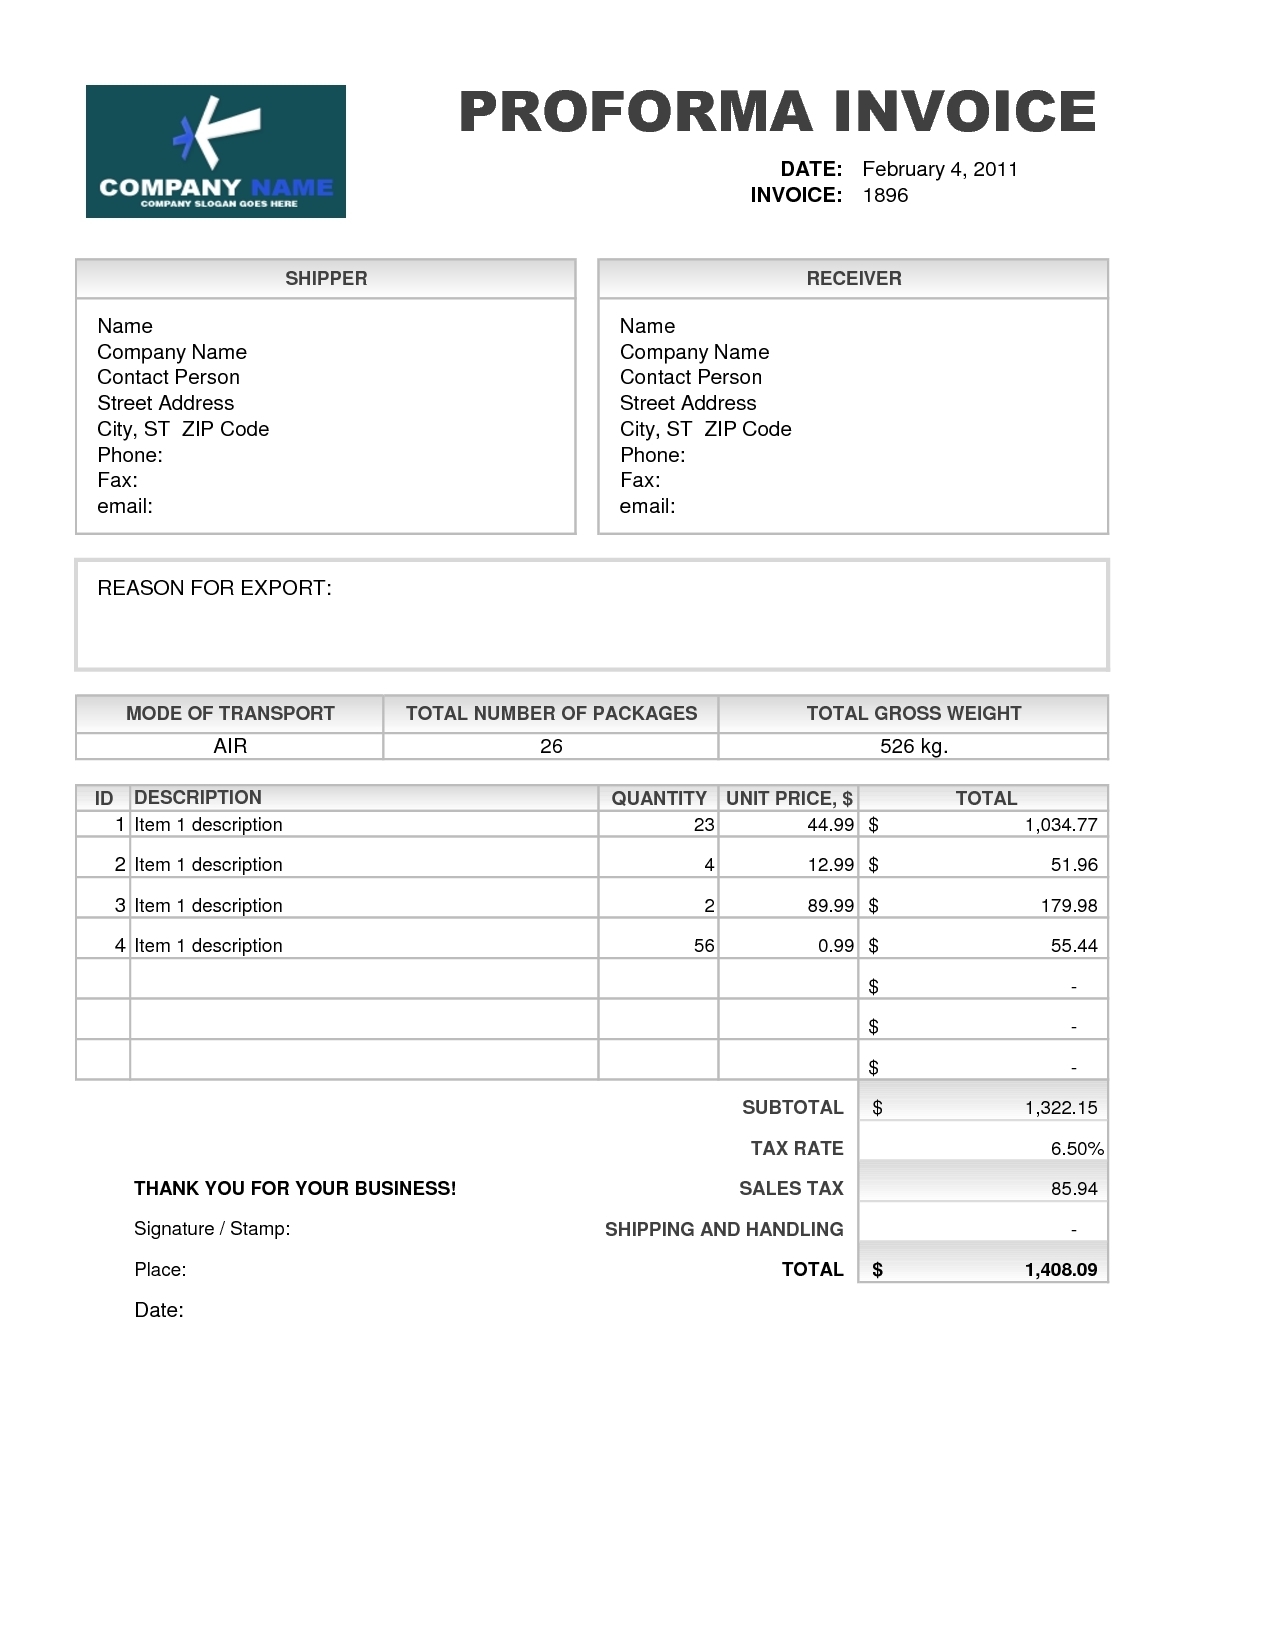 samples of proforma invoice invoice template free 2016 pro forma invoice meaning